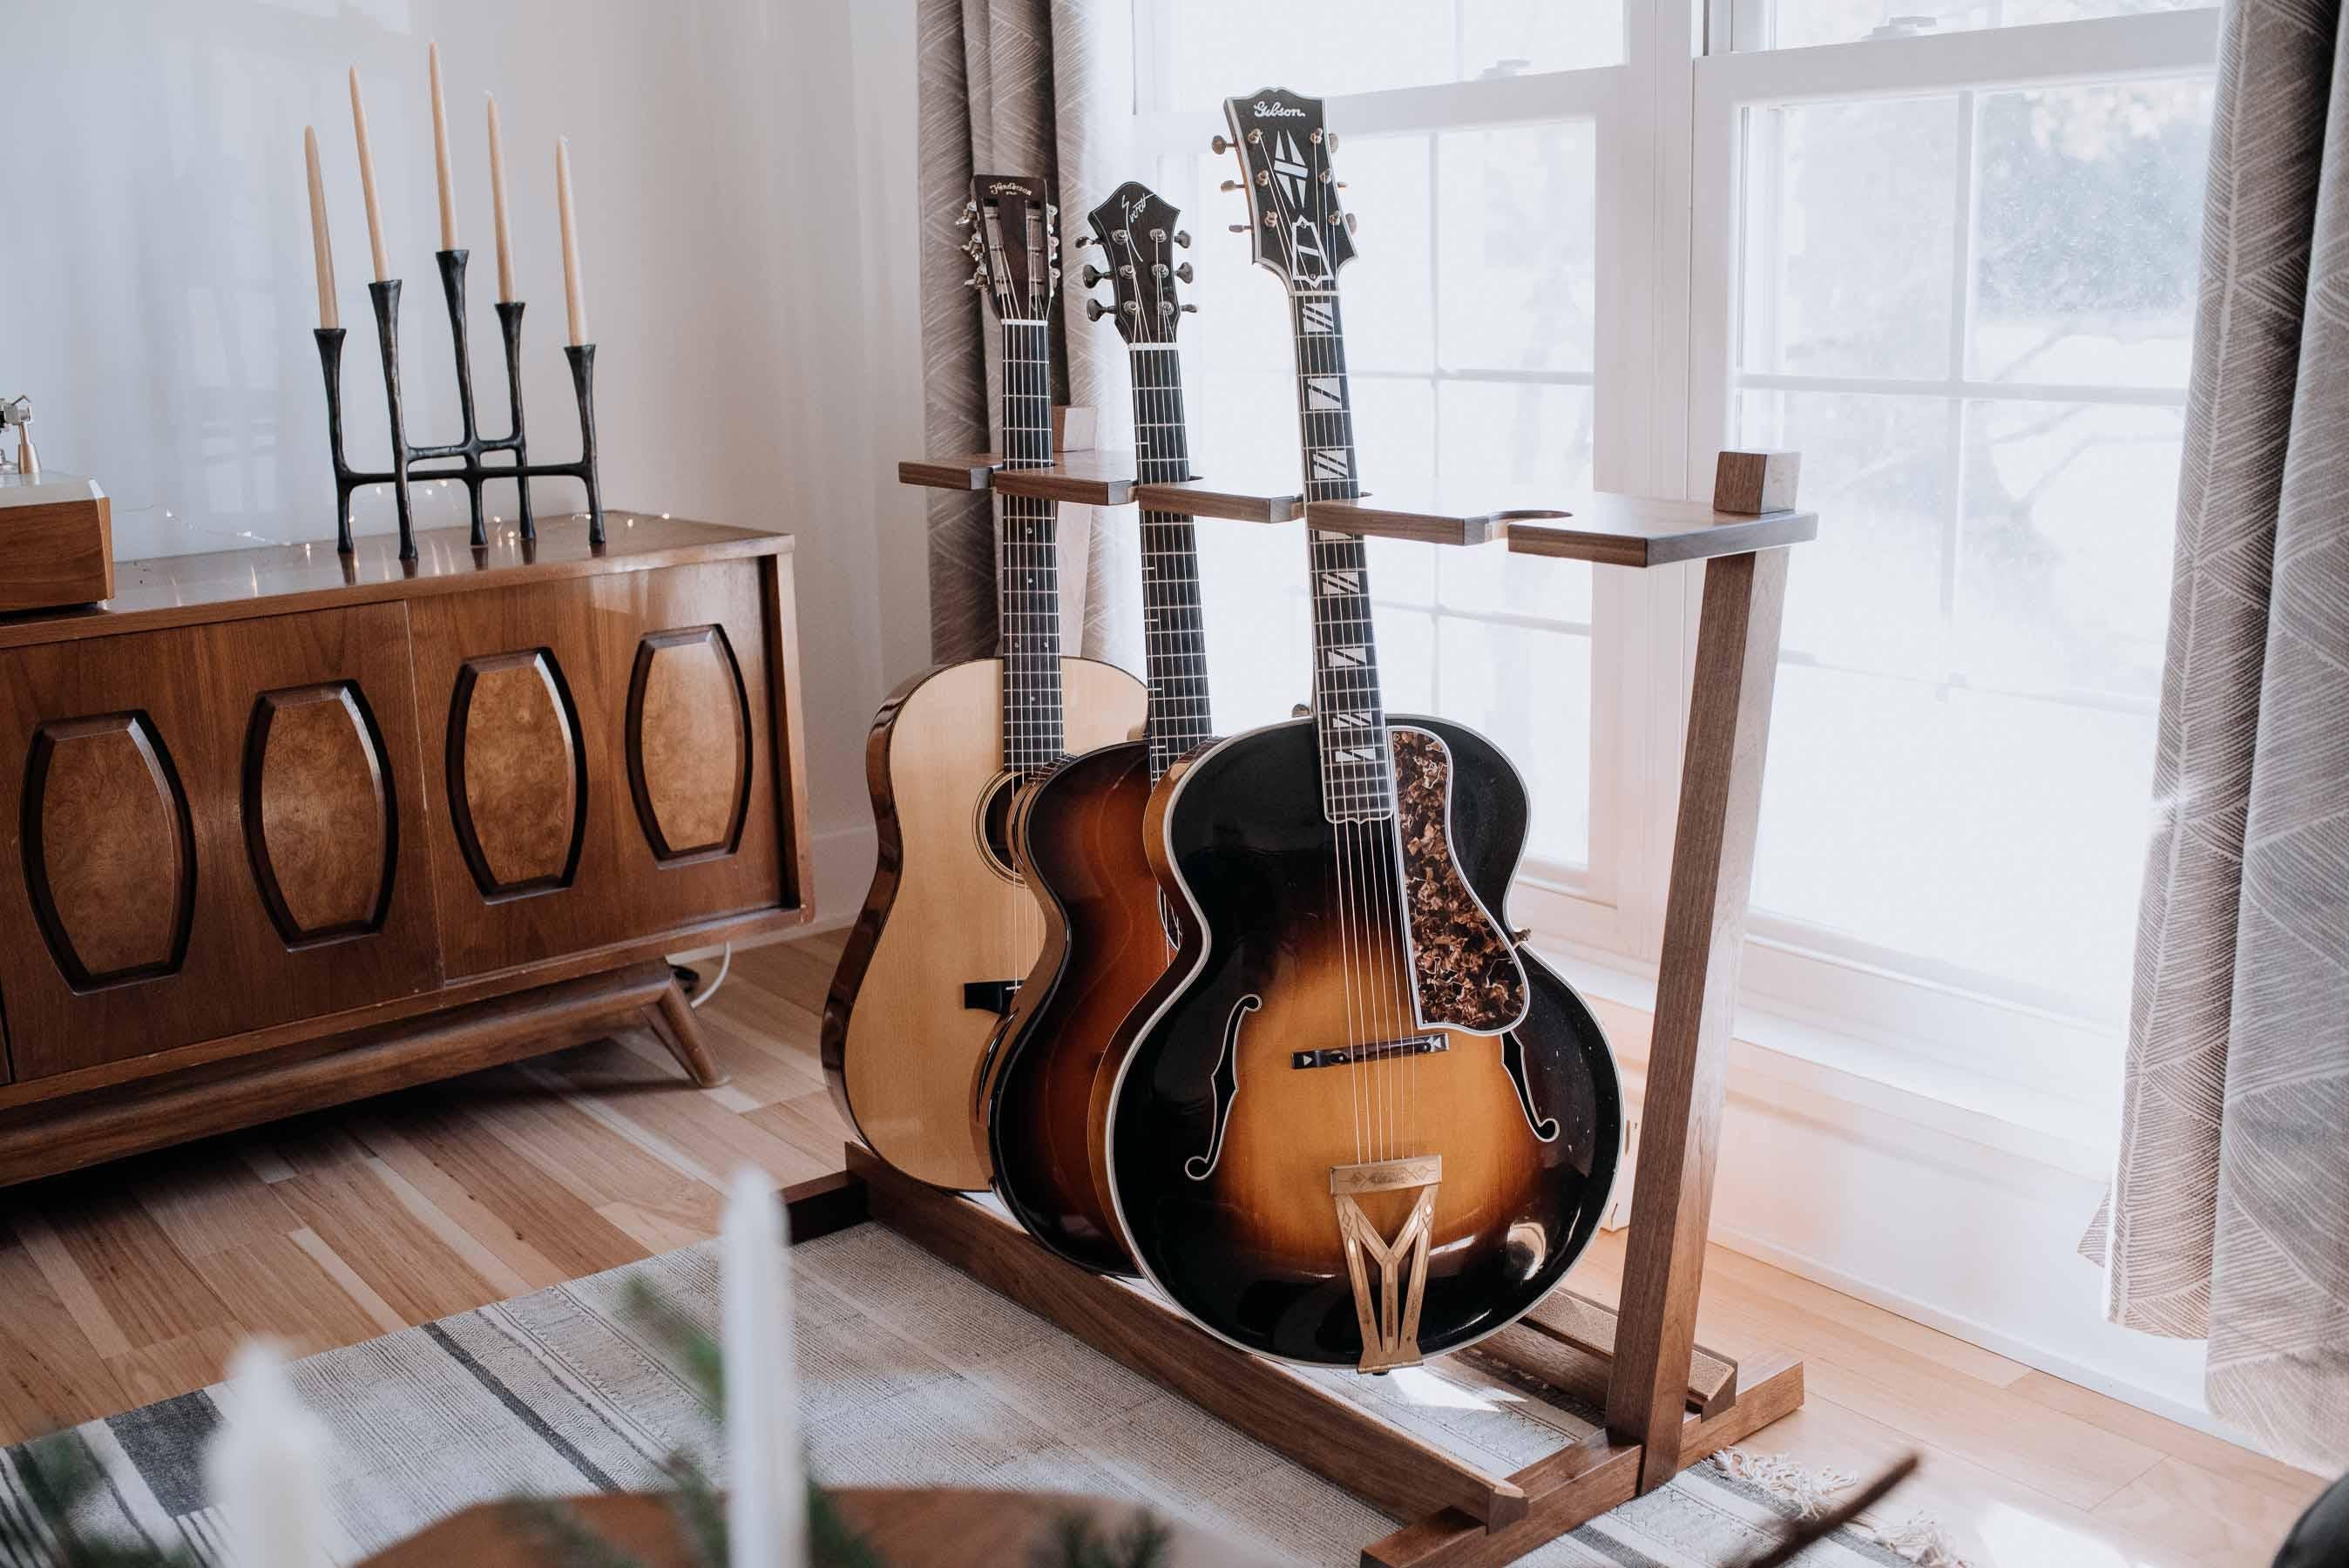 The Olin is our multi-guitar stand designed for easy access within your music space. This four-guitar display features a hand-crafted modern design with a minimalist aesthetic. We hand-select only the highest-grade local hardwoods from Pennsylvania